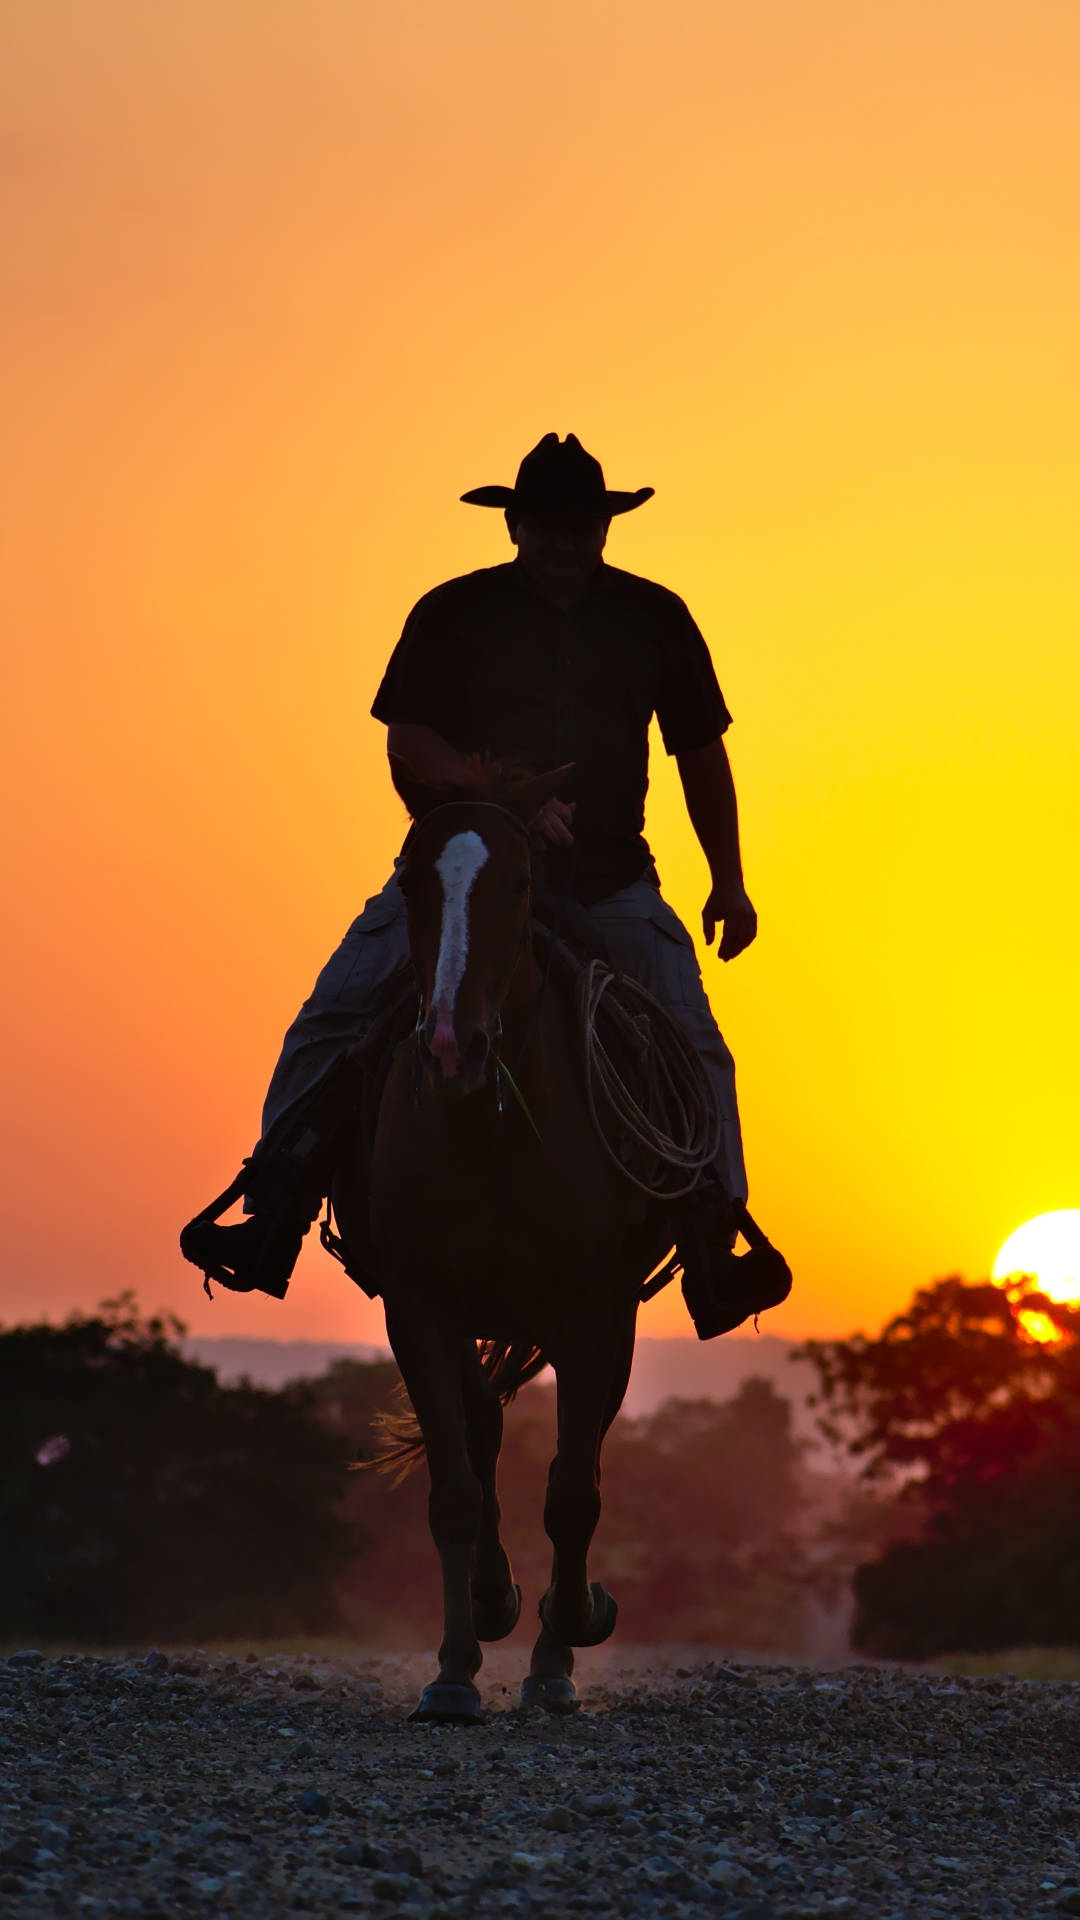 Cowboy Silhouette On Sunset Wallpaper